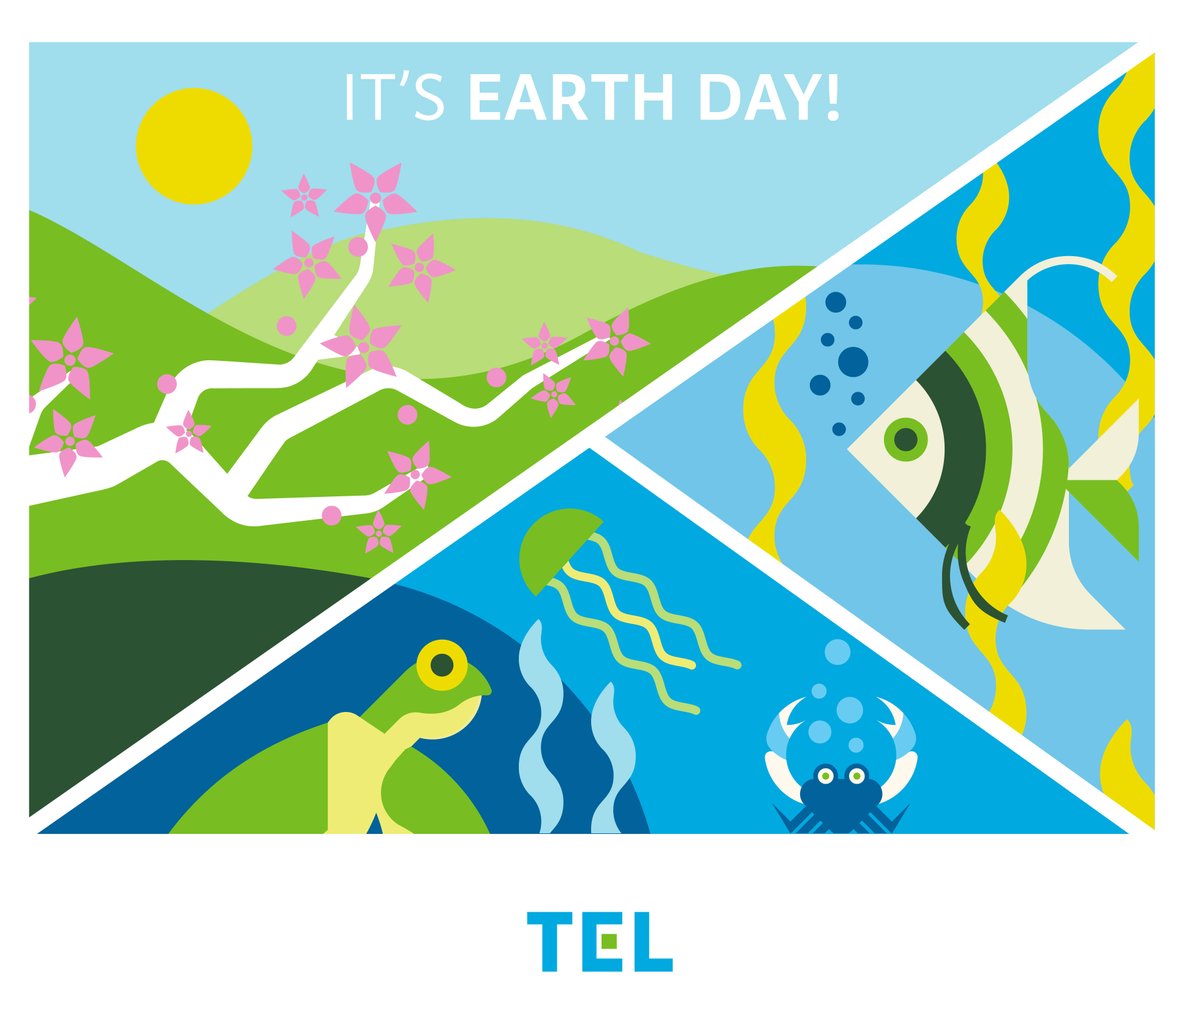 Today is #EarthDay!🌍 Sustainability is a core driver at #TEL. We understand the importance of reducing our environmental impact and encourage everyone to do their part to create a more sustainable future.